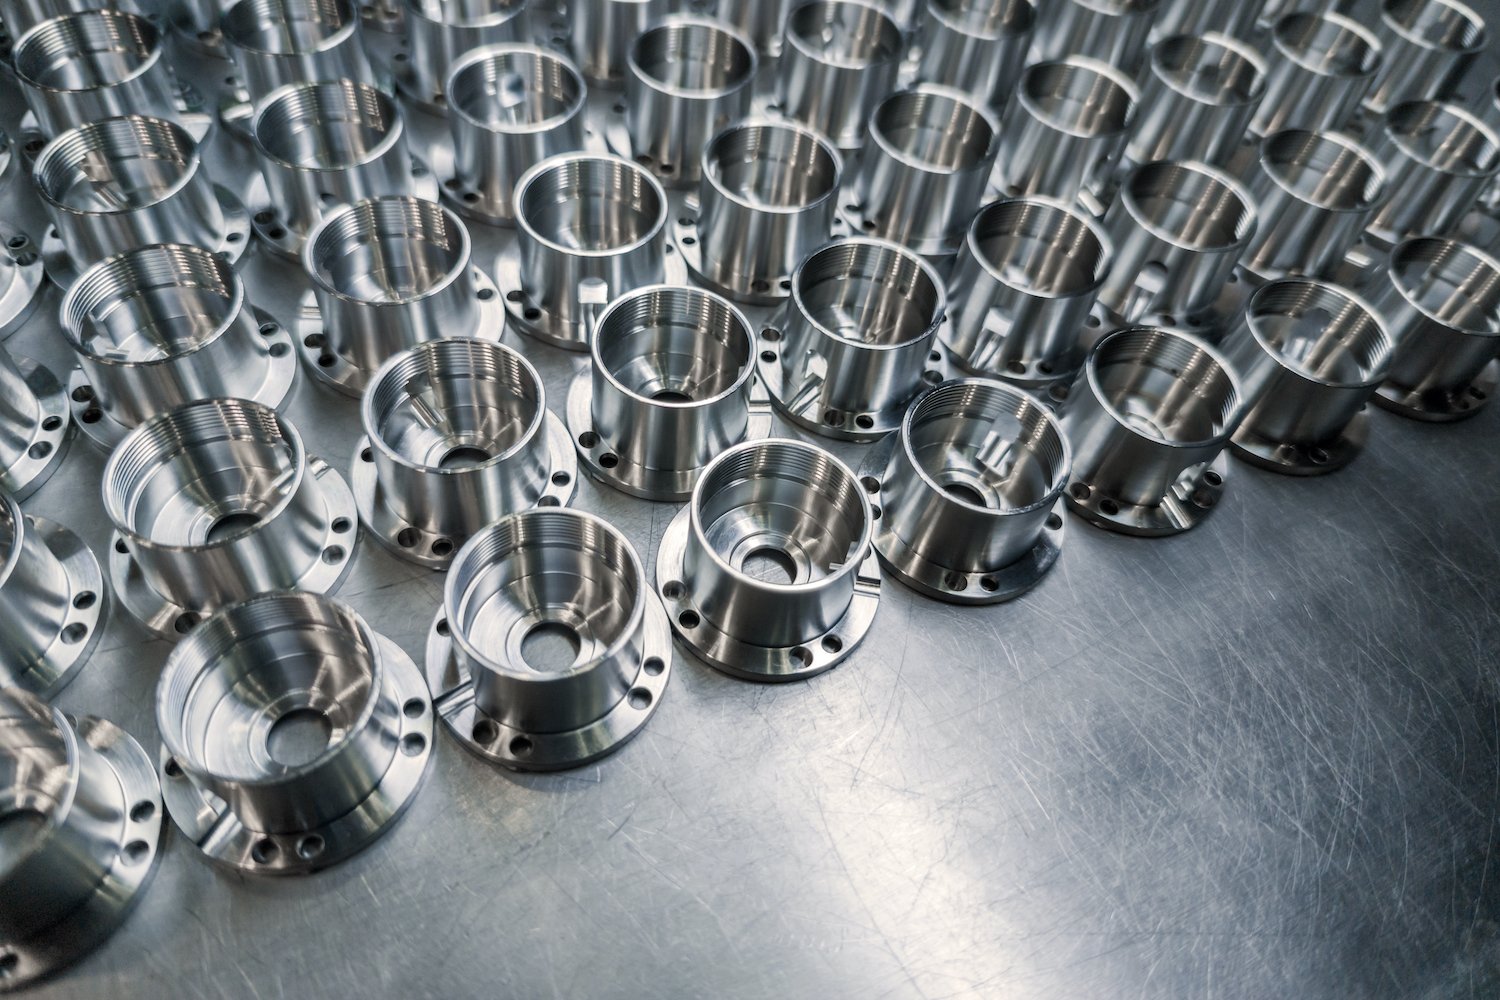 shiny-metal-aerospace-parts-after-cnc-machining-on-steel-surface-with-selective-focus-industrial-background